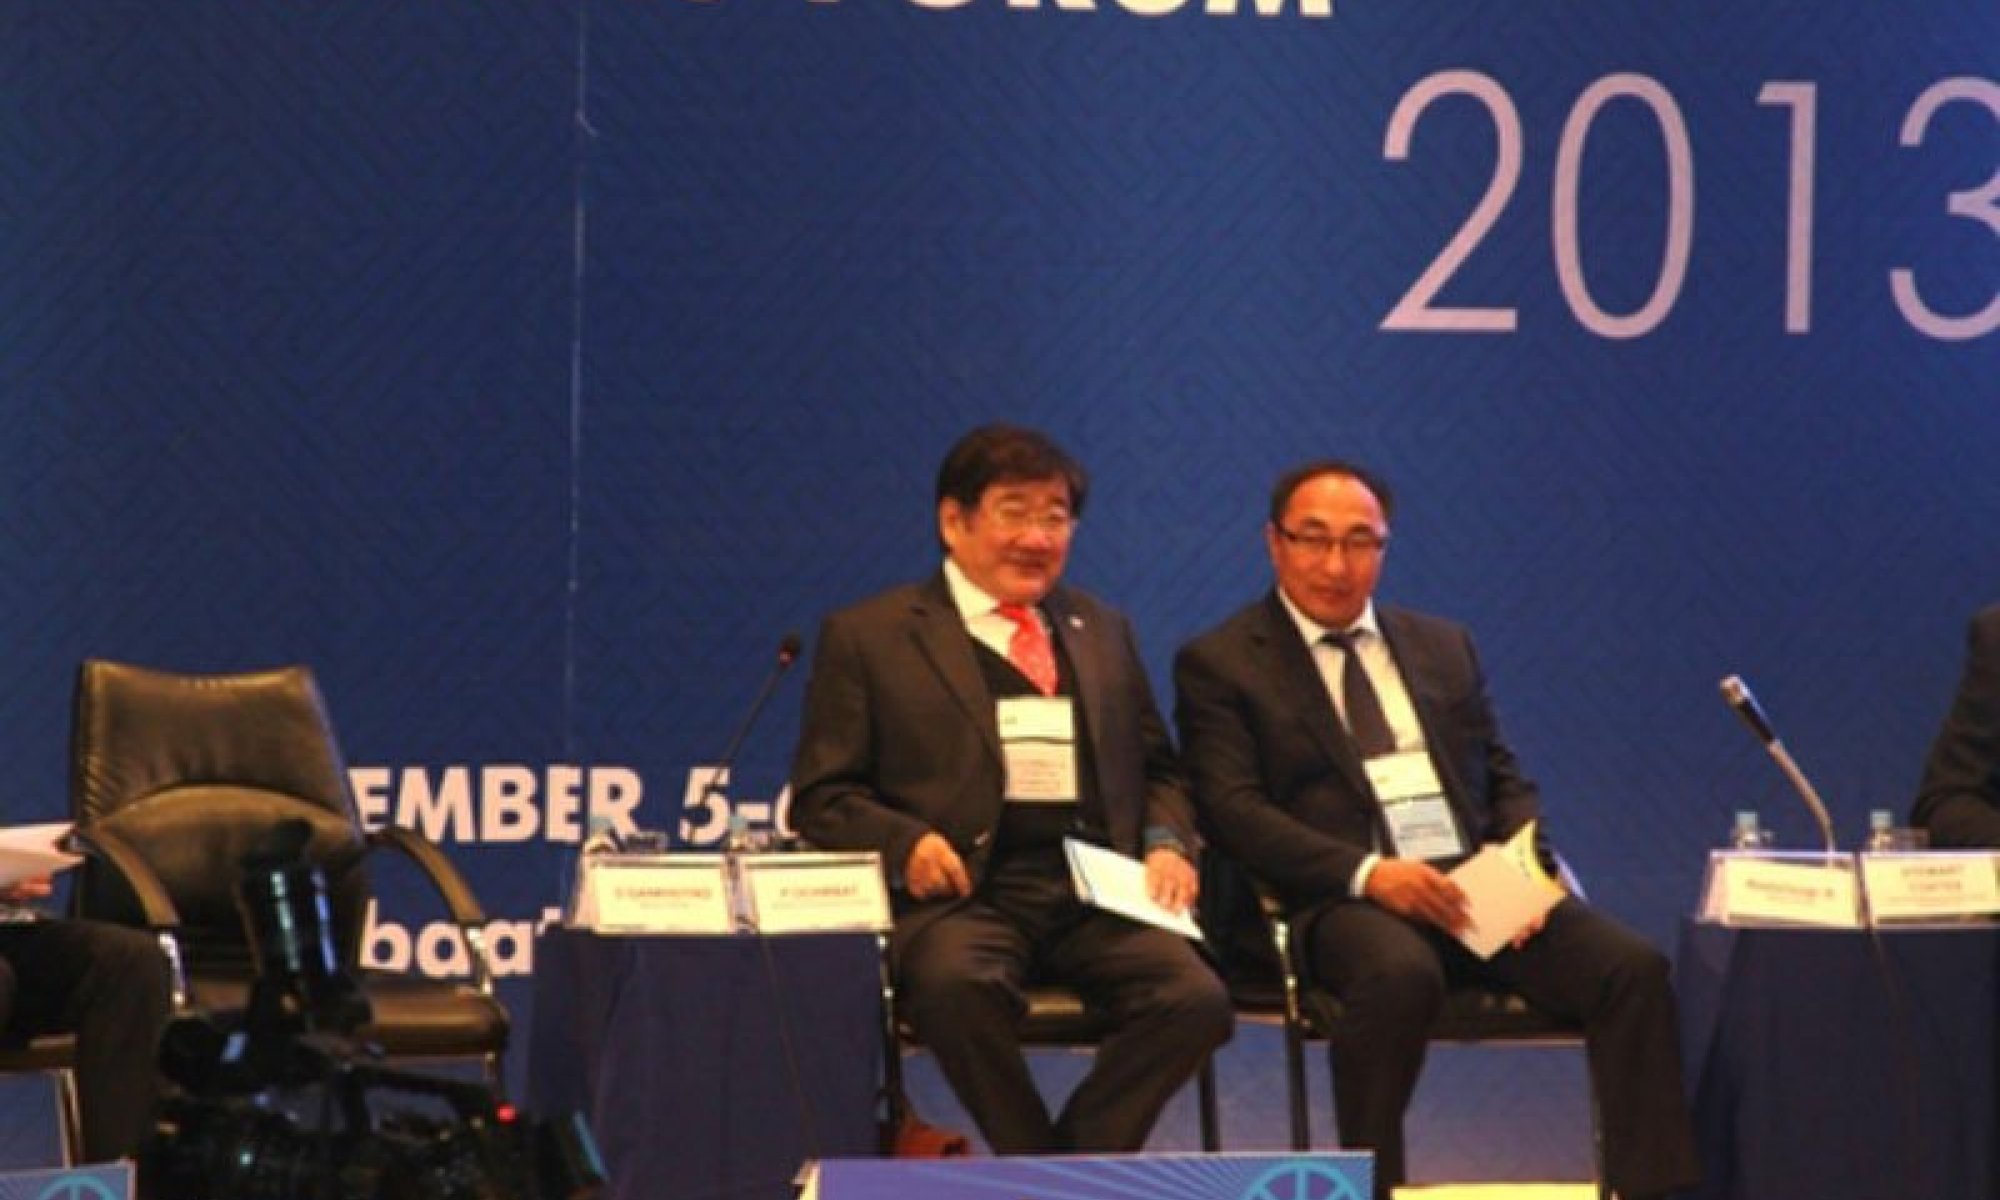 Taking part in “discover mongolia-2013” forum 